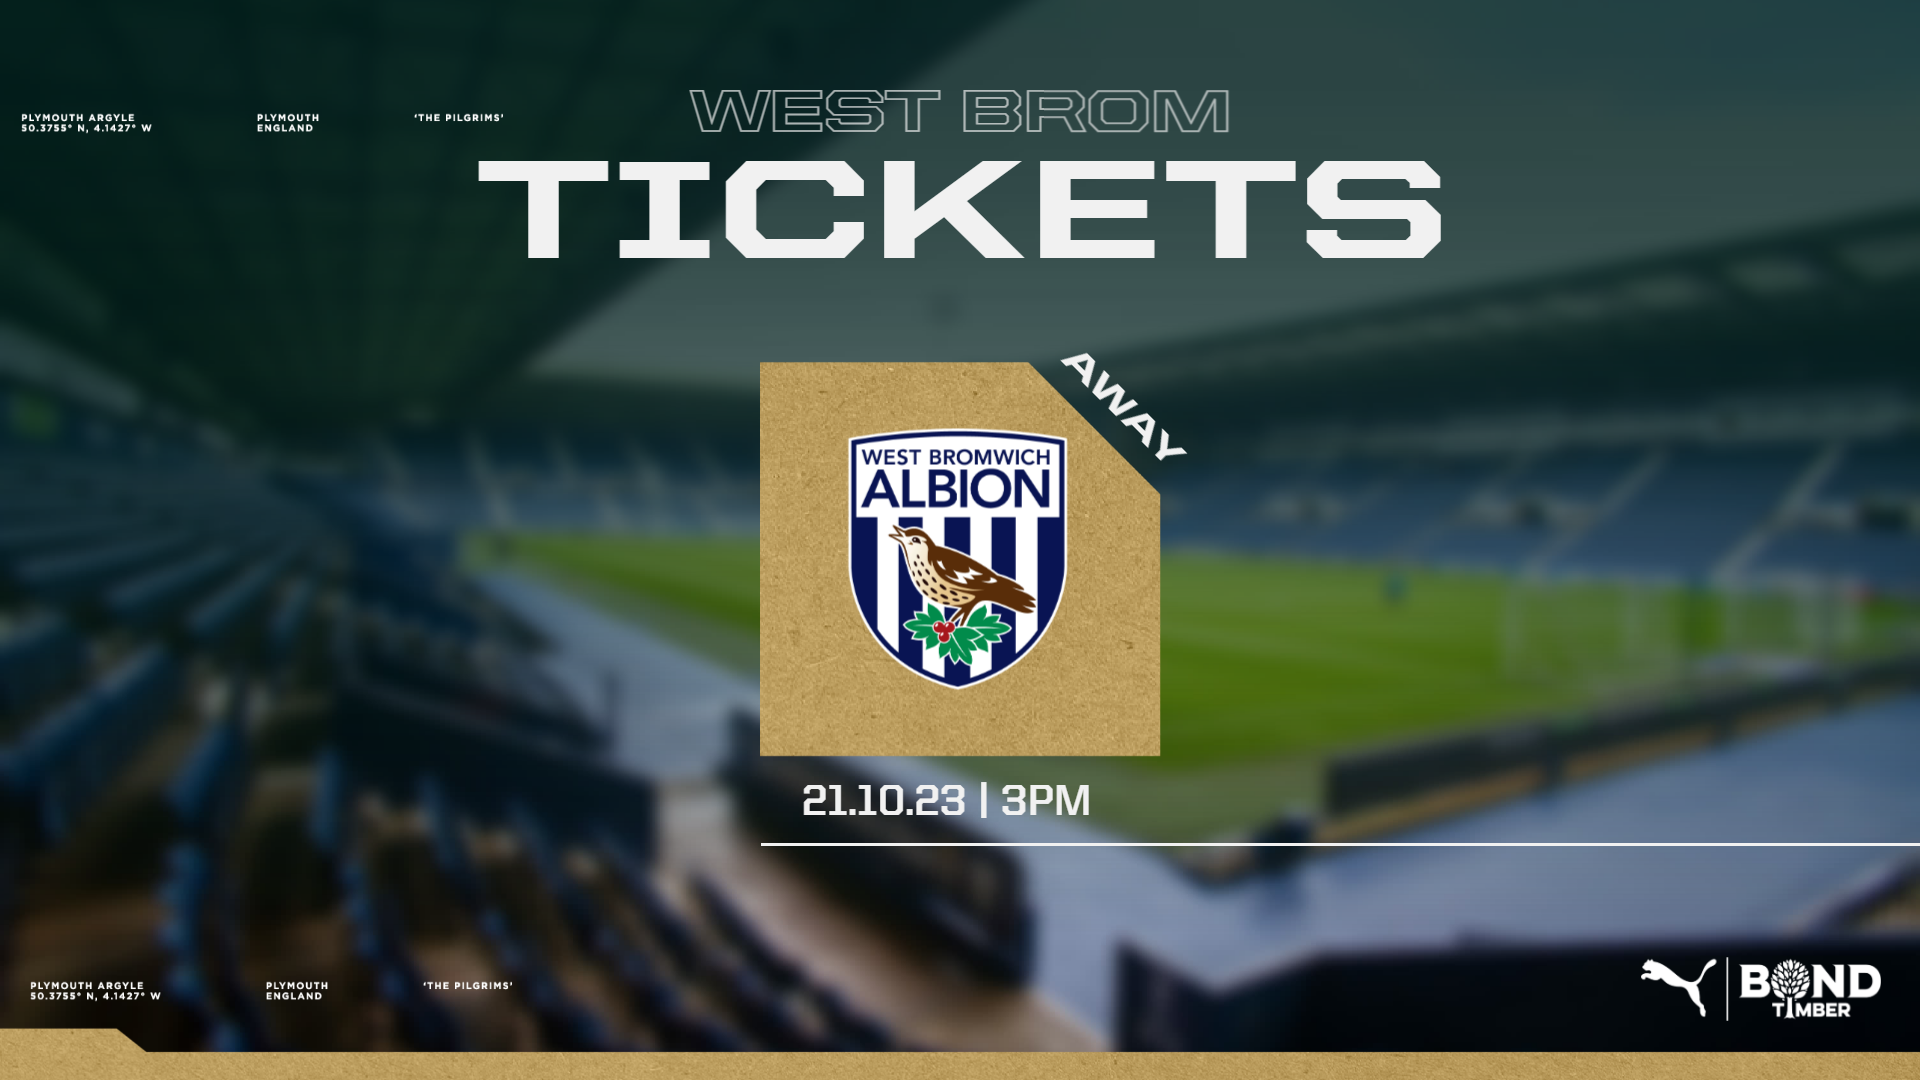 West Bromwich Albion tickets